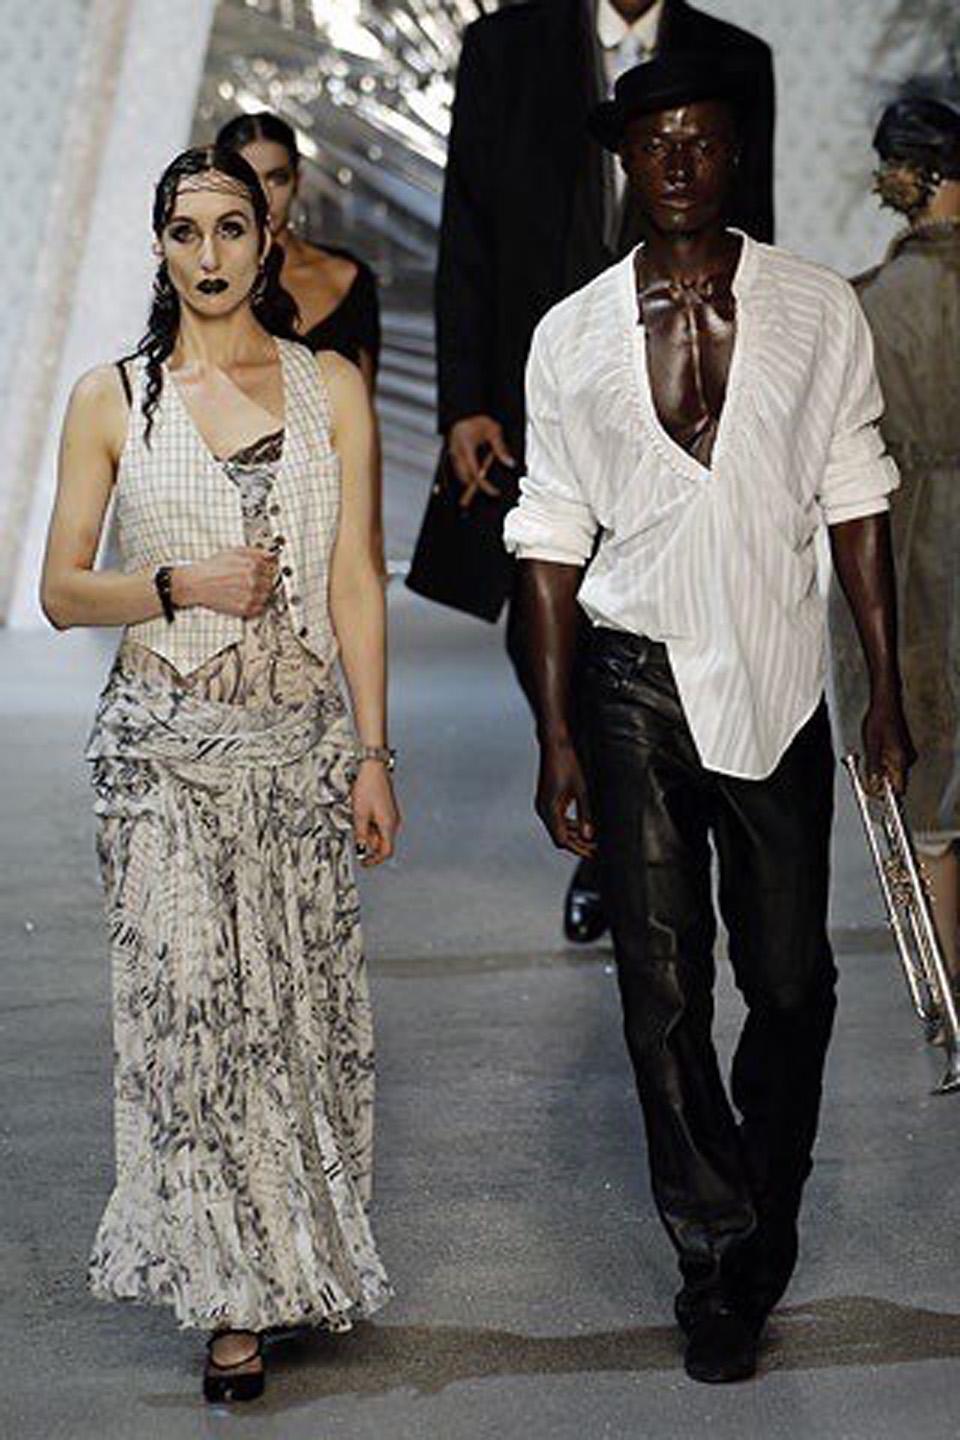 A breathtaking John Galliano novelty newspaper print semi-sheer silk chiffon bias cut gown dating back to his documented 2006 spring-summer Paris runway collection. Vogue commented on this memorable show, 